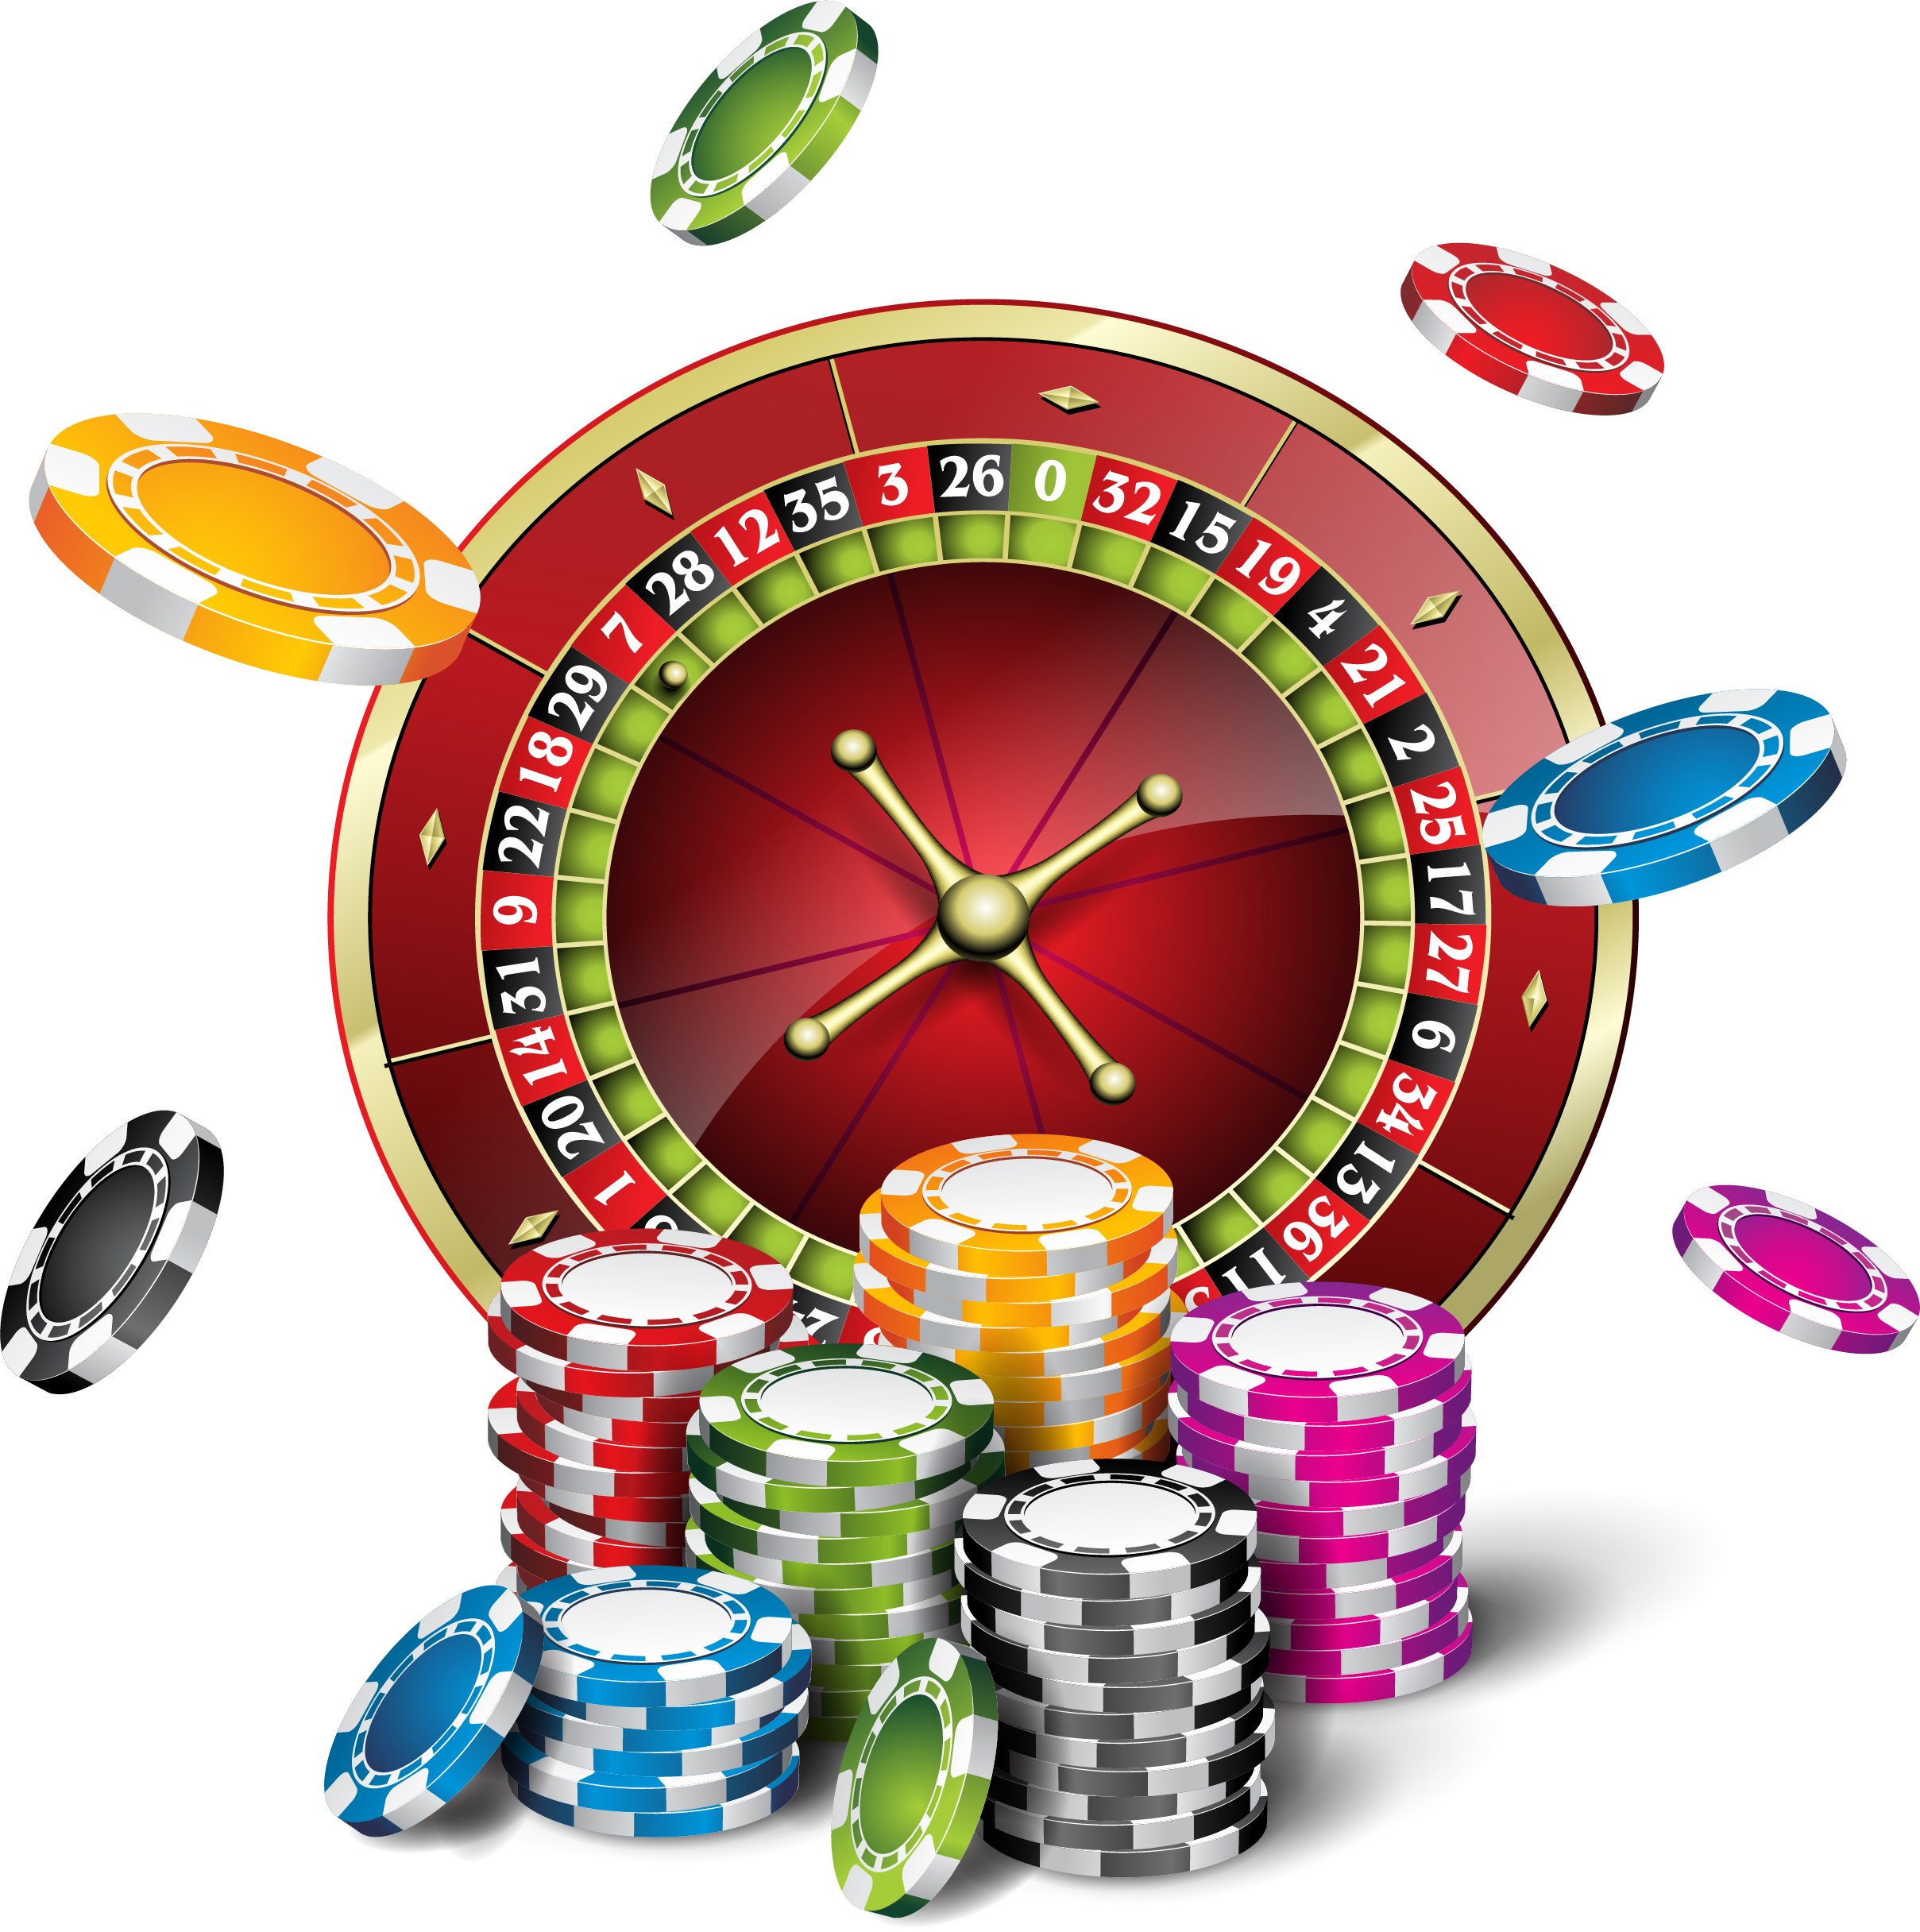 Casino Roulette PNG HD Image